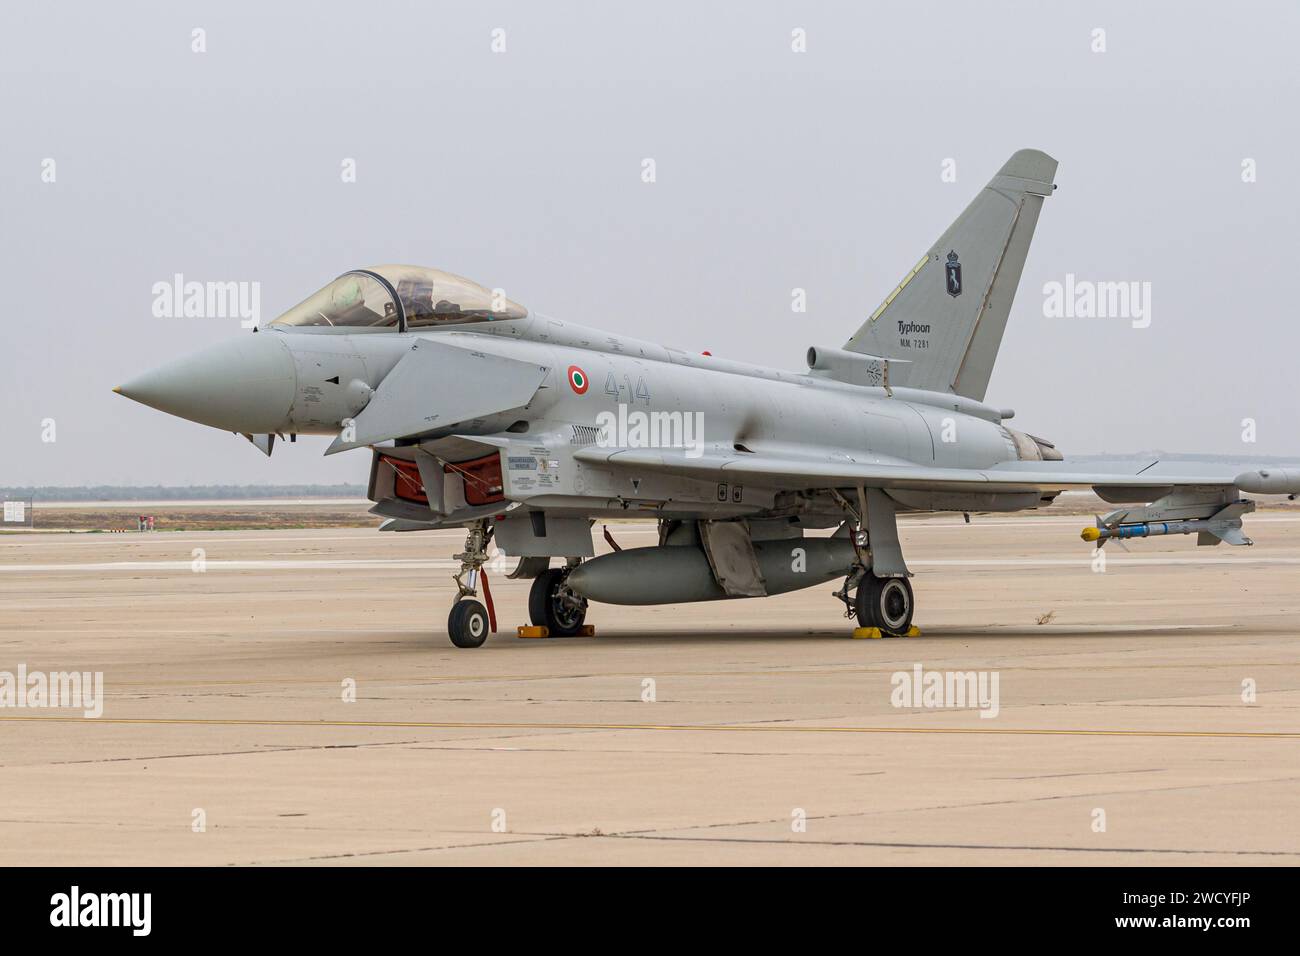 MORÓN DE LA FRONTERA, SPAIN-SEP 22: Aircraft Eurofighter Typhoon C-16 taking part in a exhibition on the open day of the airbase of Morón on September Stock Photo